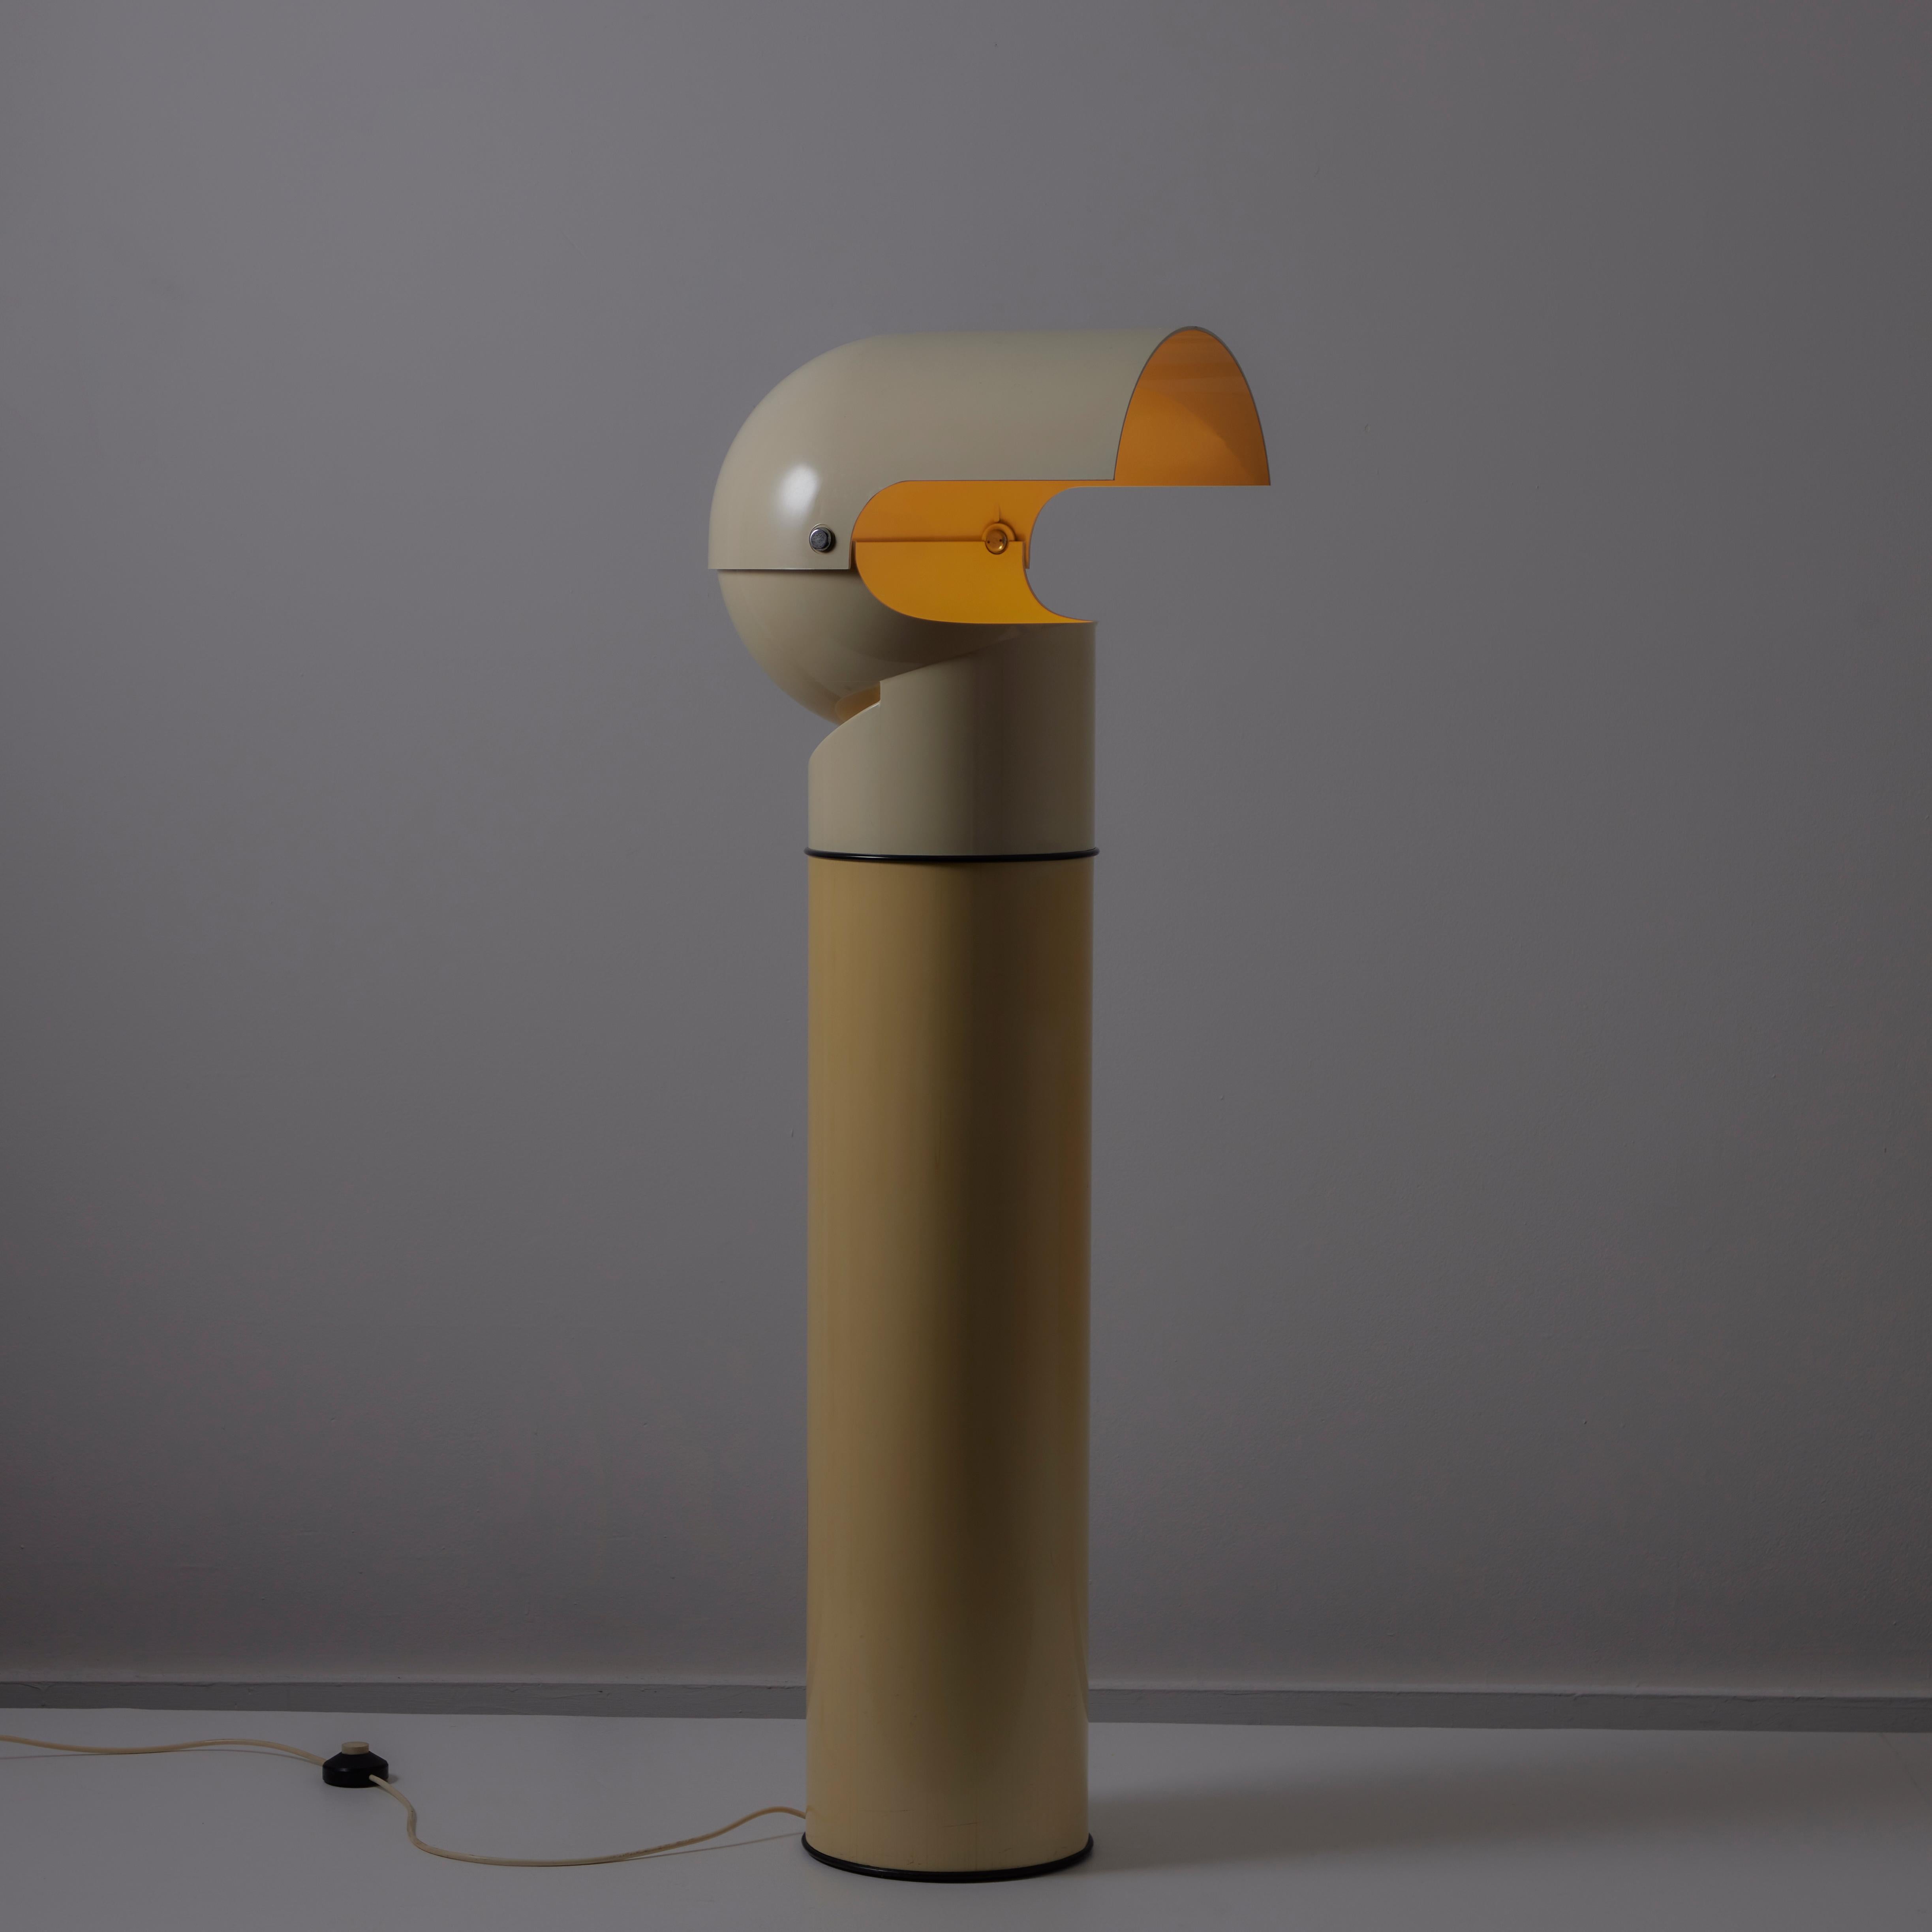 'Pileo' Floor Lamp by Gae Aulenti for Artemide. Designed and manufactured in Italy, in 1972. Two-toned all-plastic floor lamp with an adjustable shade. The lamp consists of a single E27 socket type, adapted for the US. We recommend a single 40-60 w